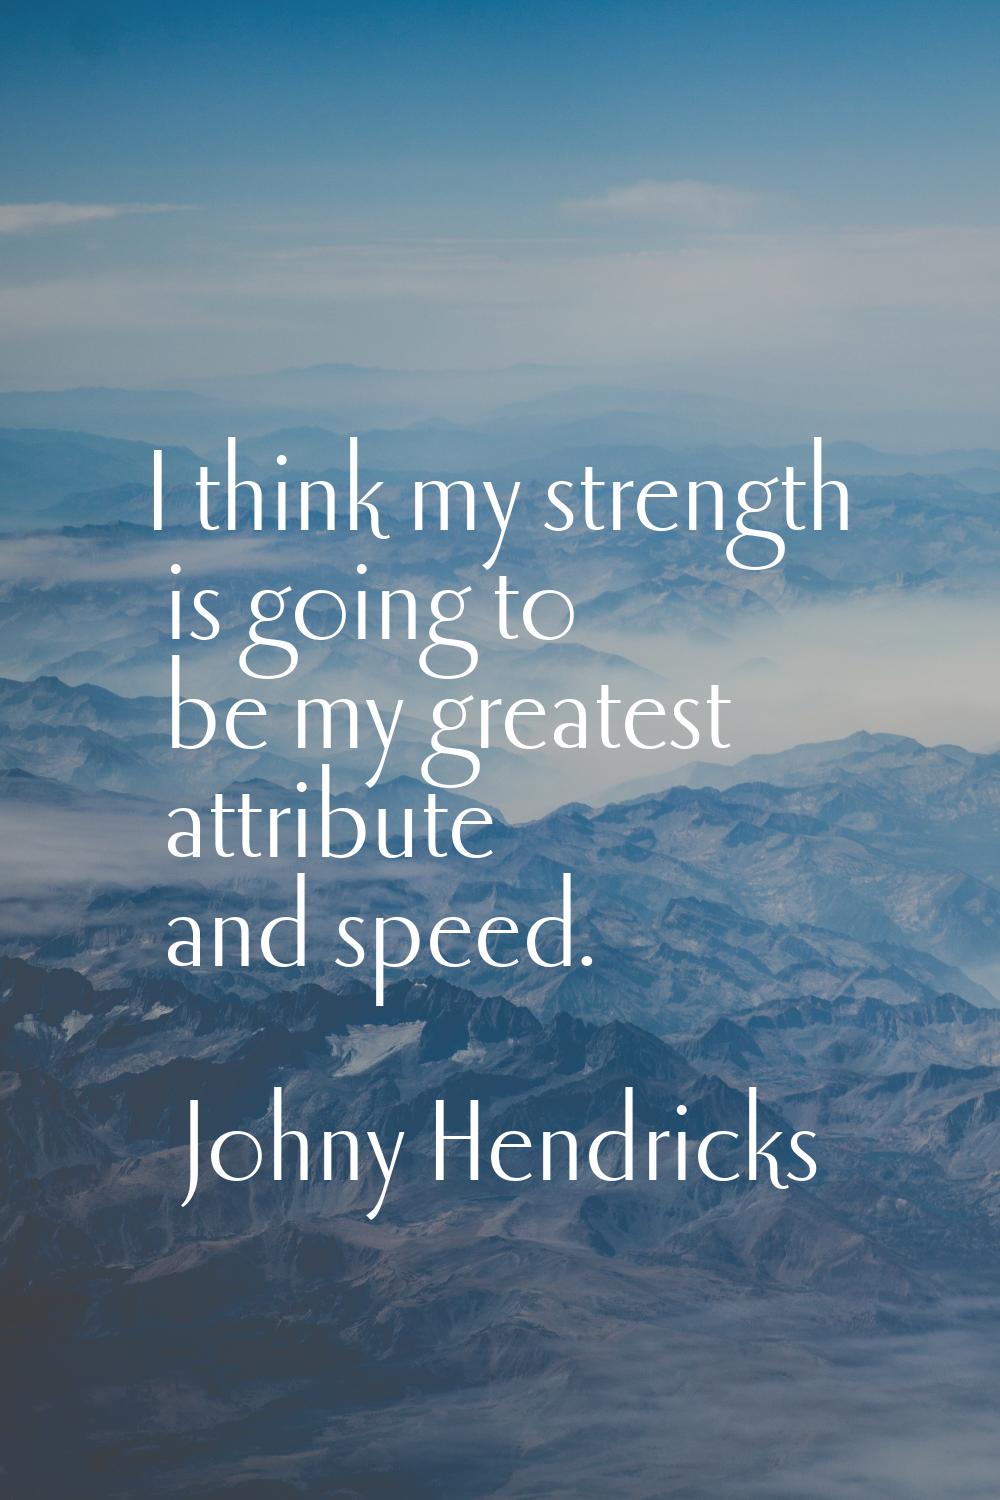 I think my strength is going to be my greatest attribute and speed.